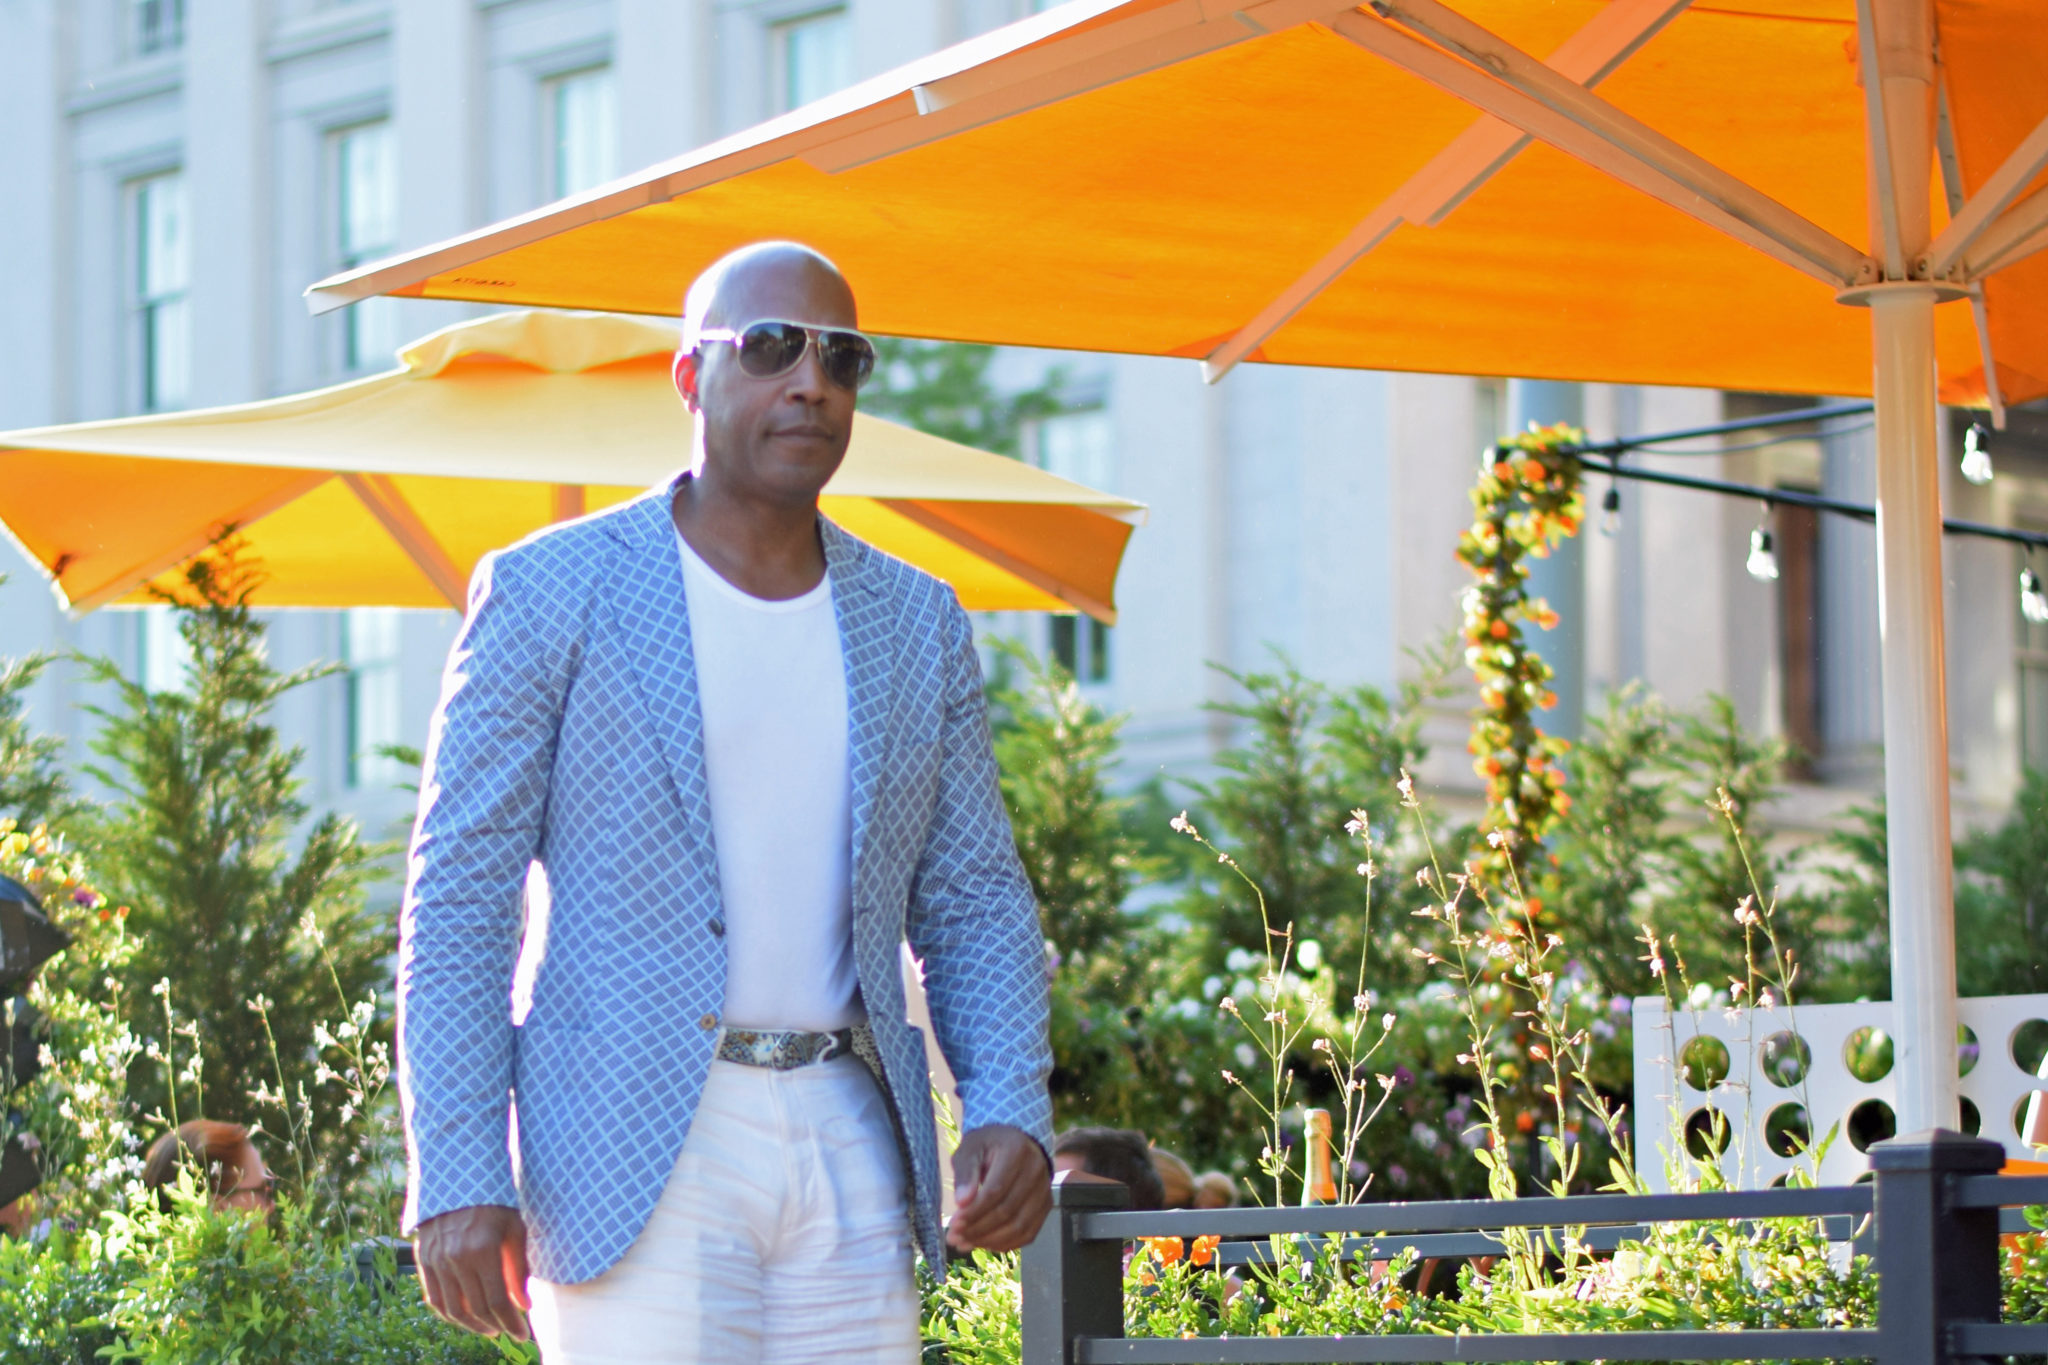 Veuve Clicquot Polo Classic Viewing Party - The DCFashion Fool